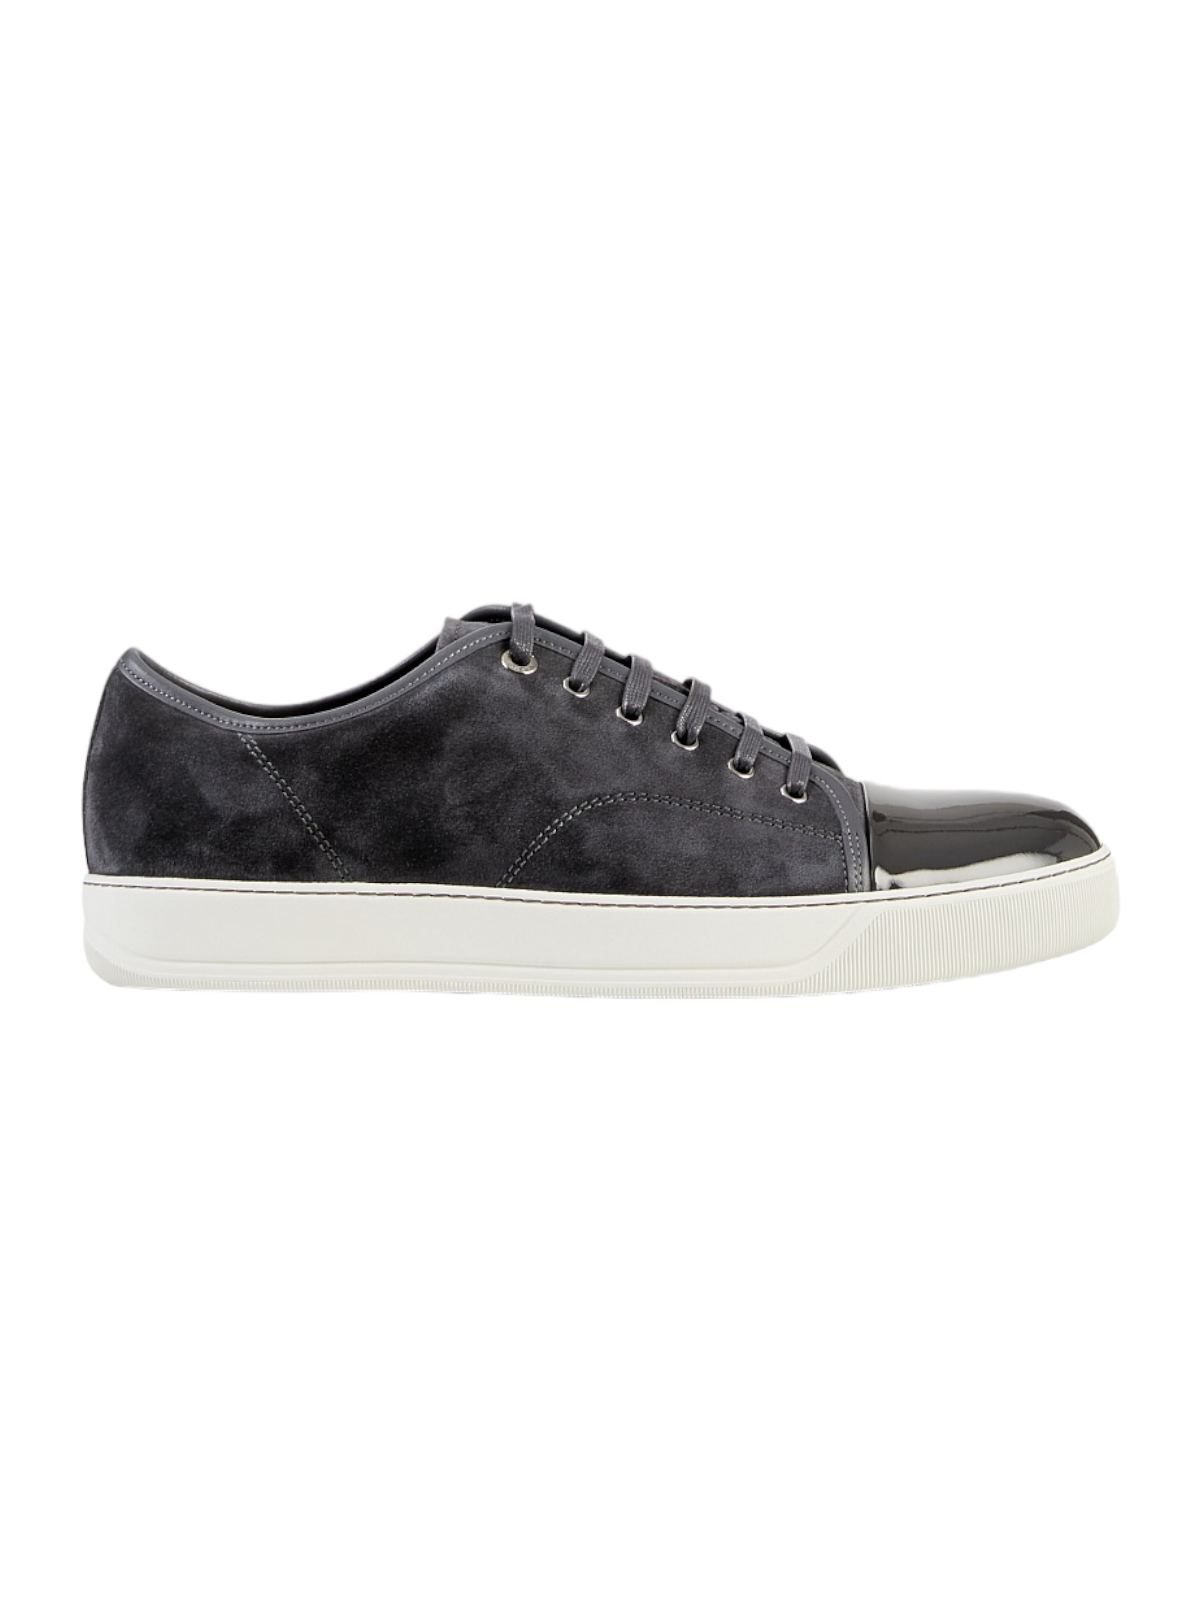 Lanvin DBB1 Suede & Leather Shiny Toe Cap Sneakers